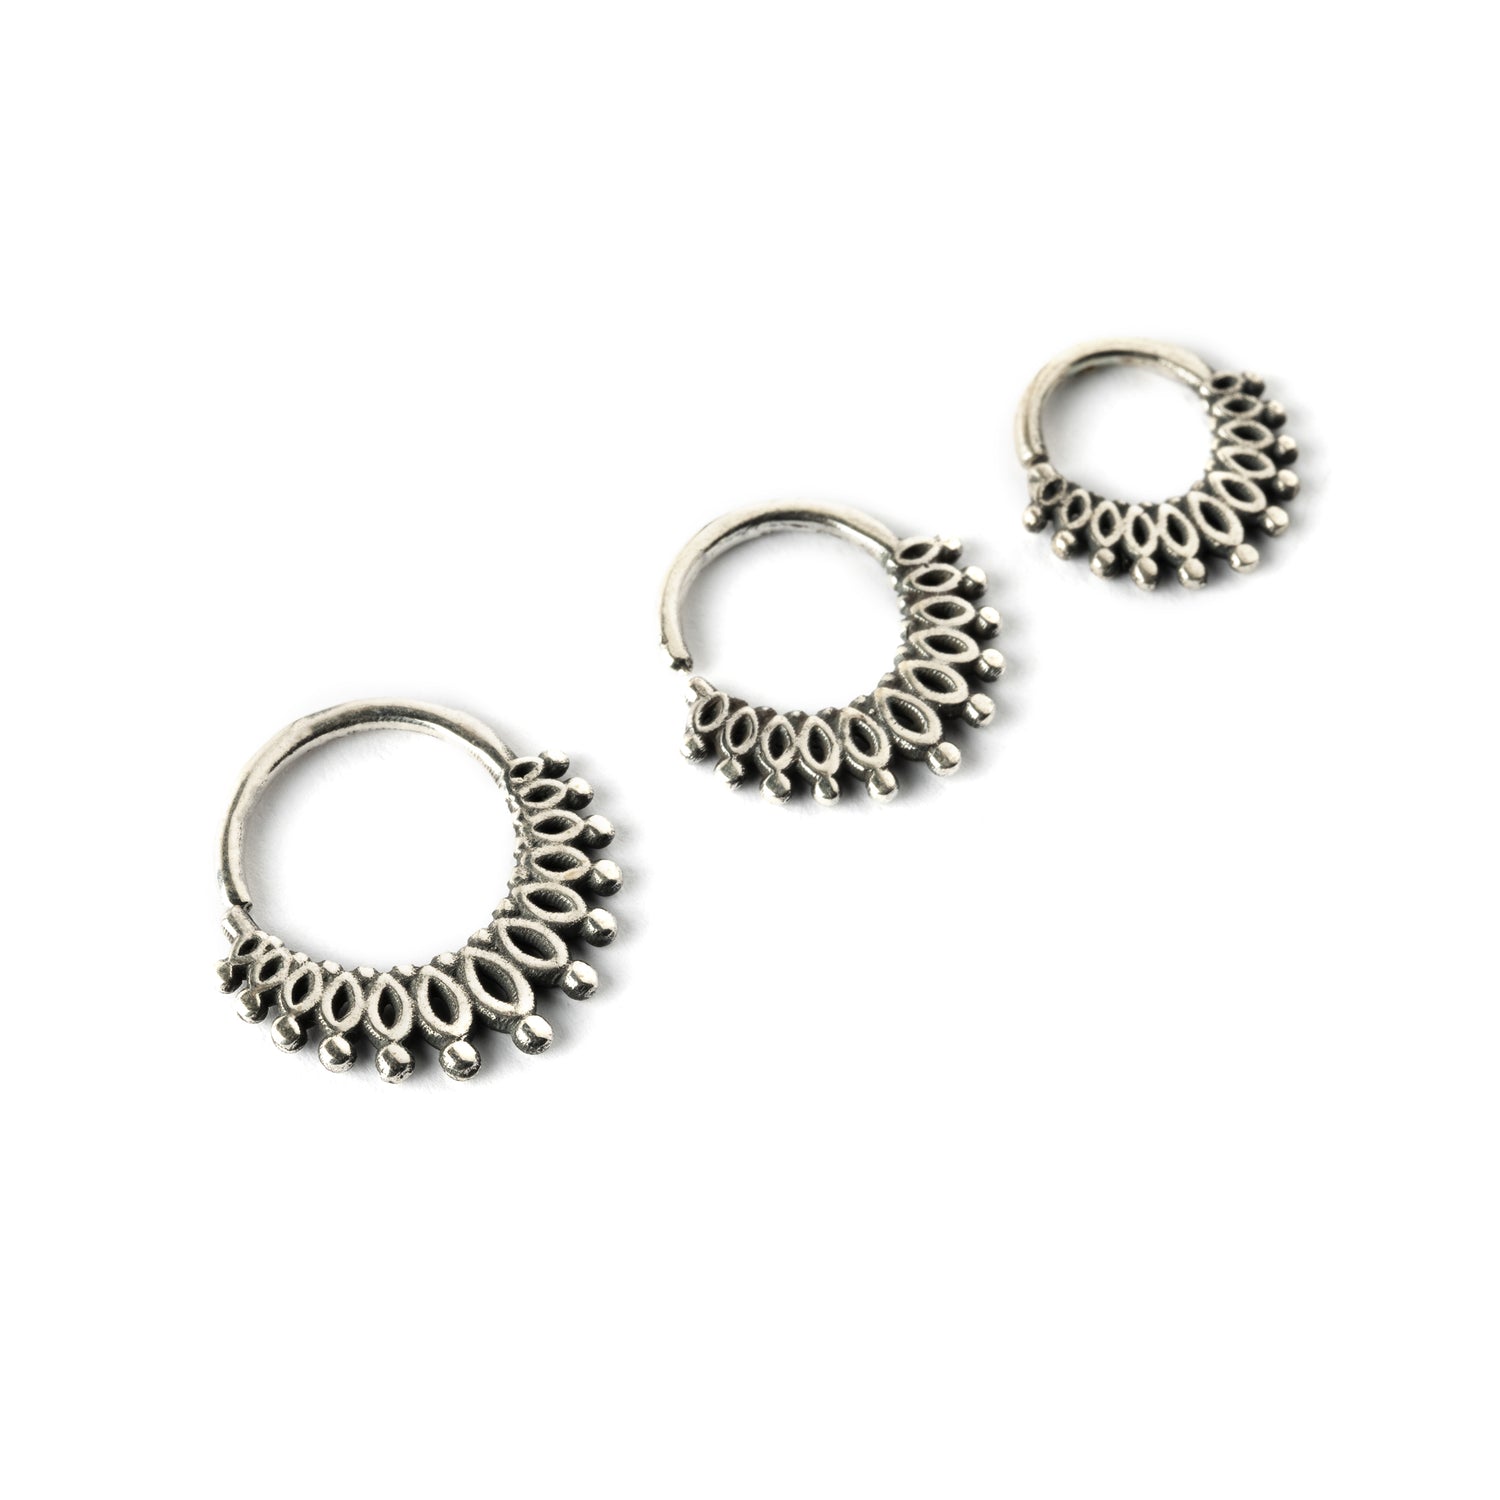 6mm, 8mm and 10mm Sterling silver boho tribal septum ring ornamented with petals